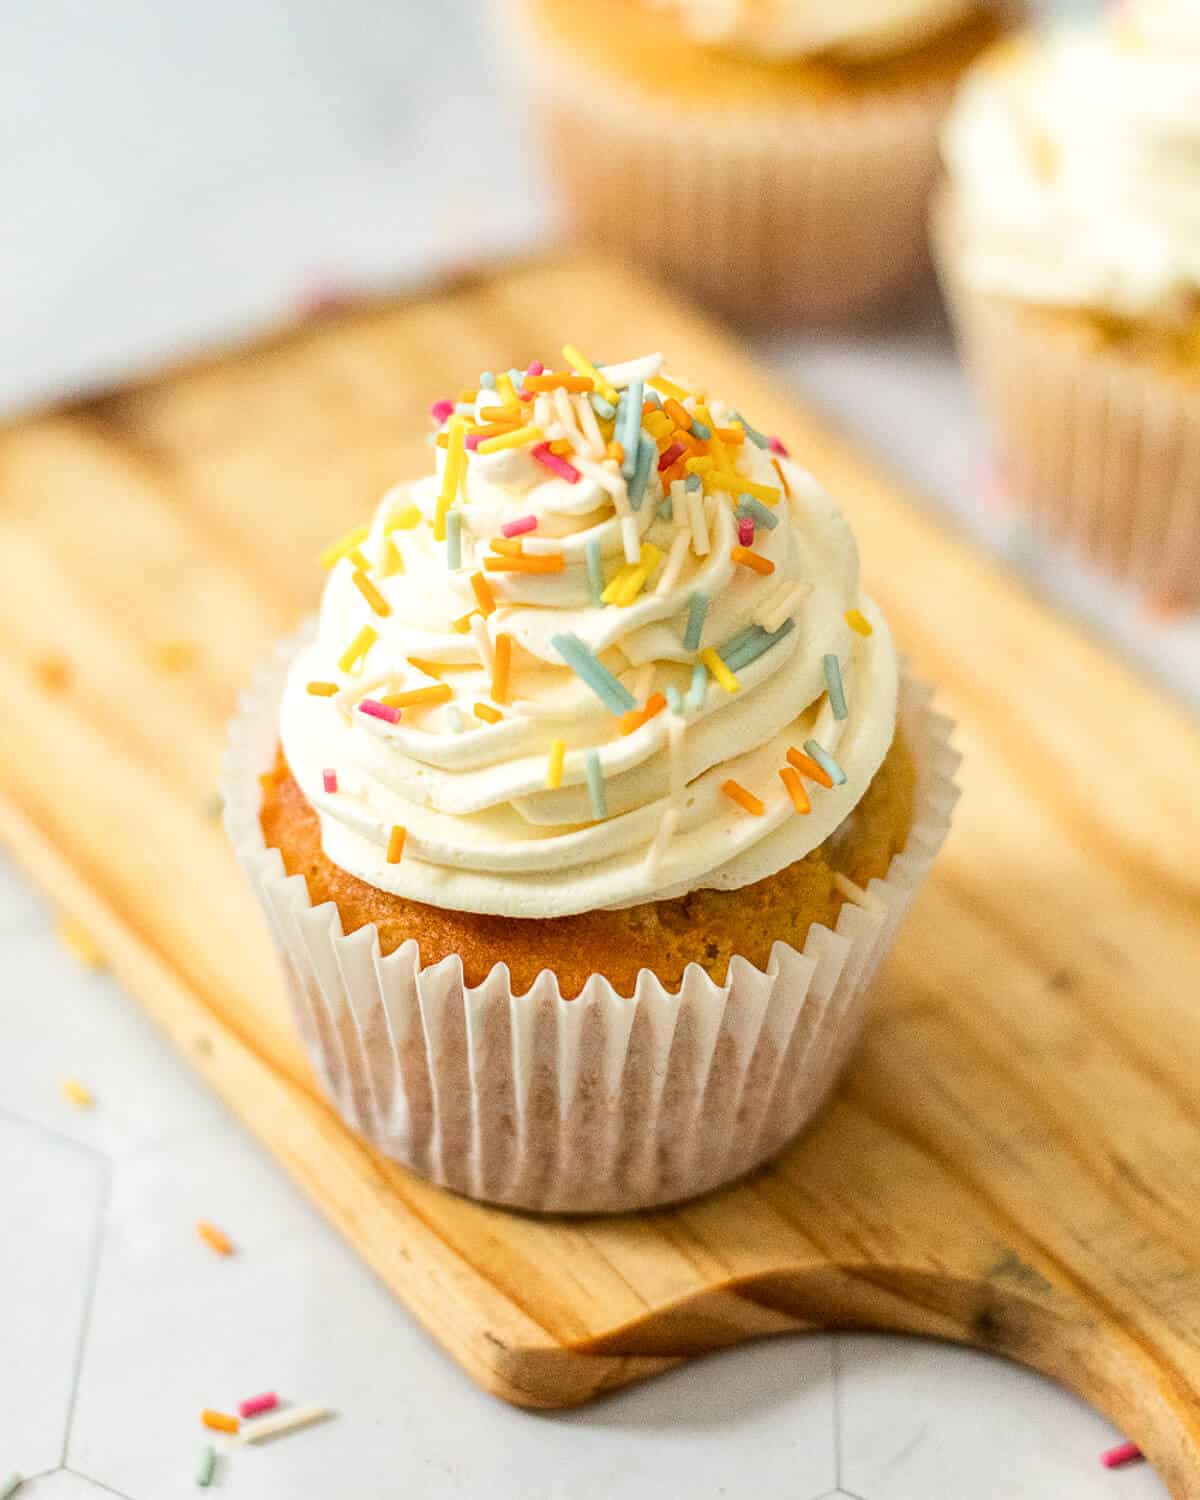 A vanilla cupcake with funfetti sprinkles on a small wooden board. There are two more cupcakes in the background.